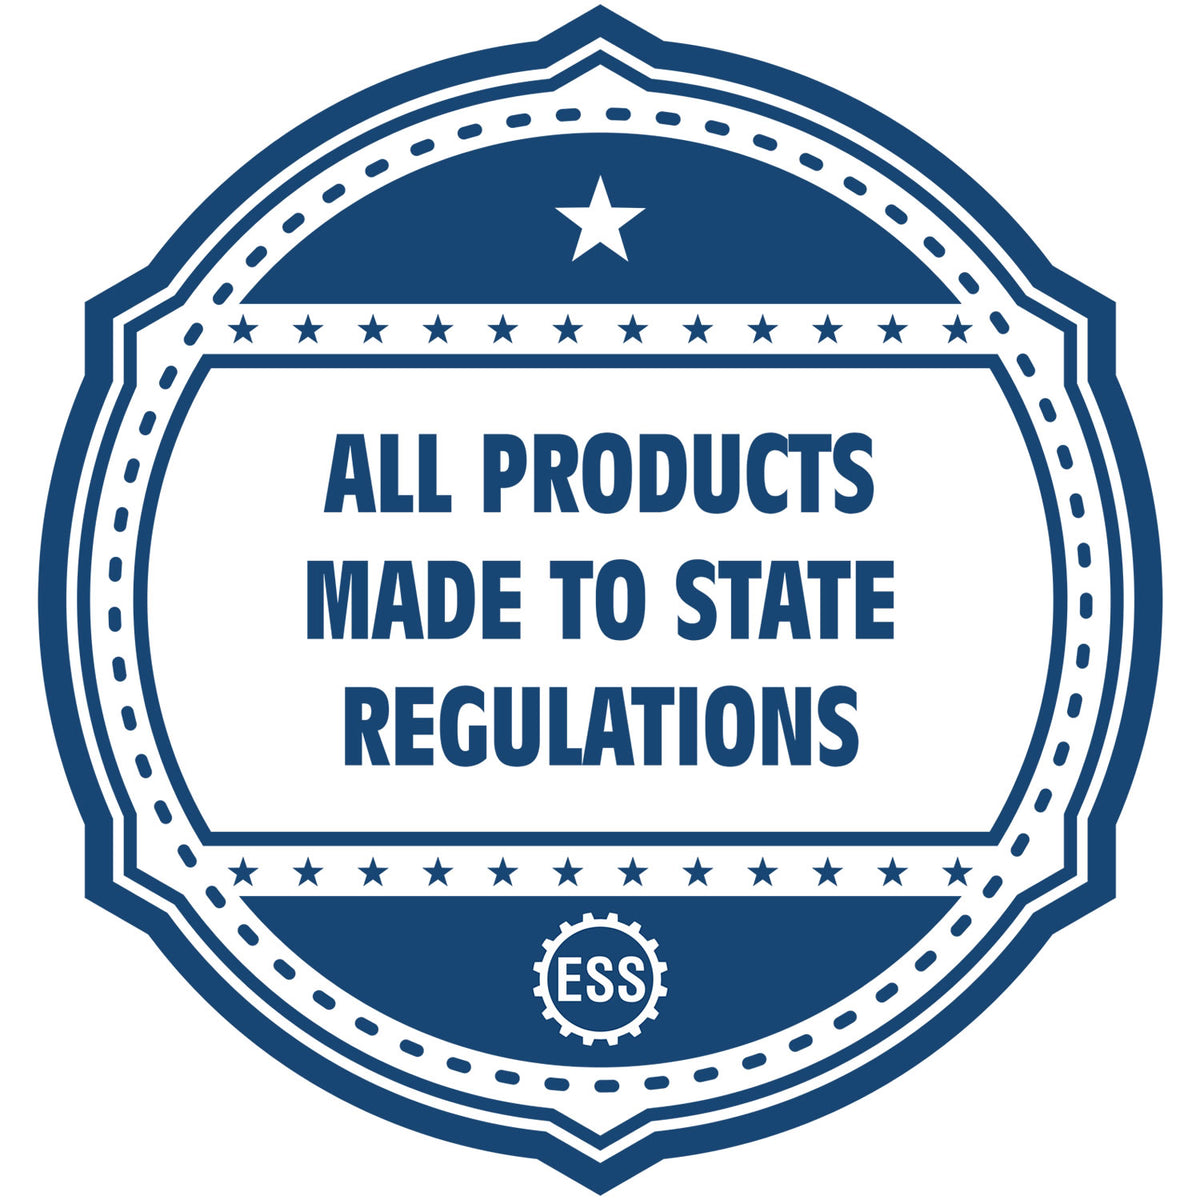 An icon or badge element for the Heavy Duty Cast Iron Idaho Engineer Seal Embosser showing that this product is made in compliance with state regulations.